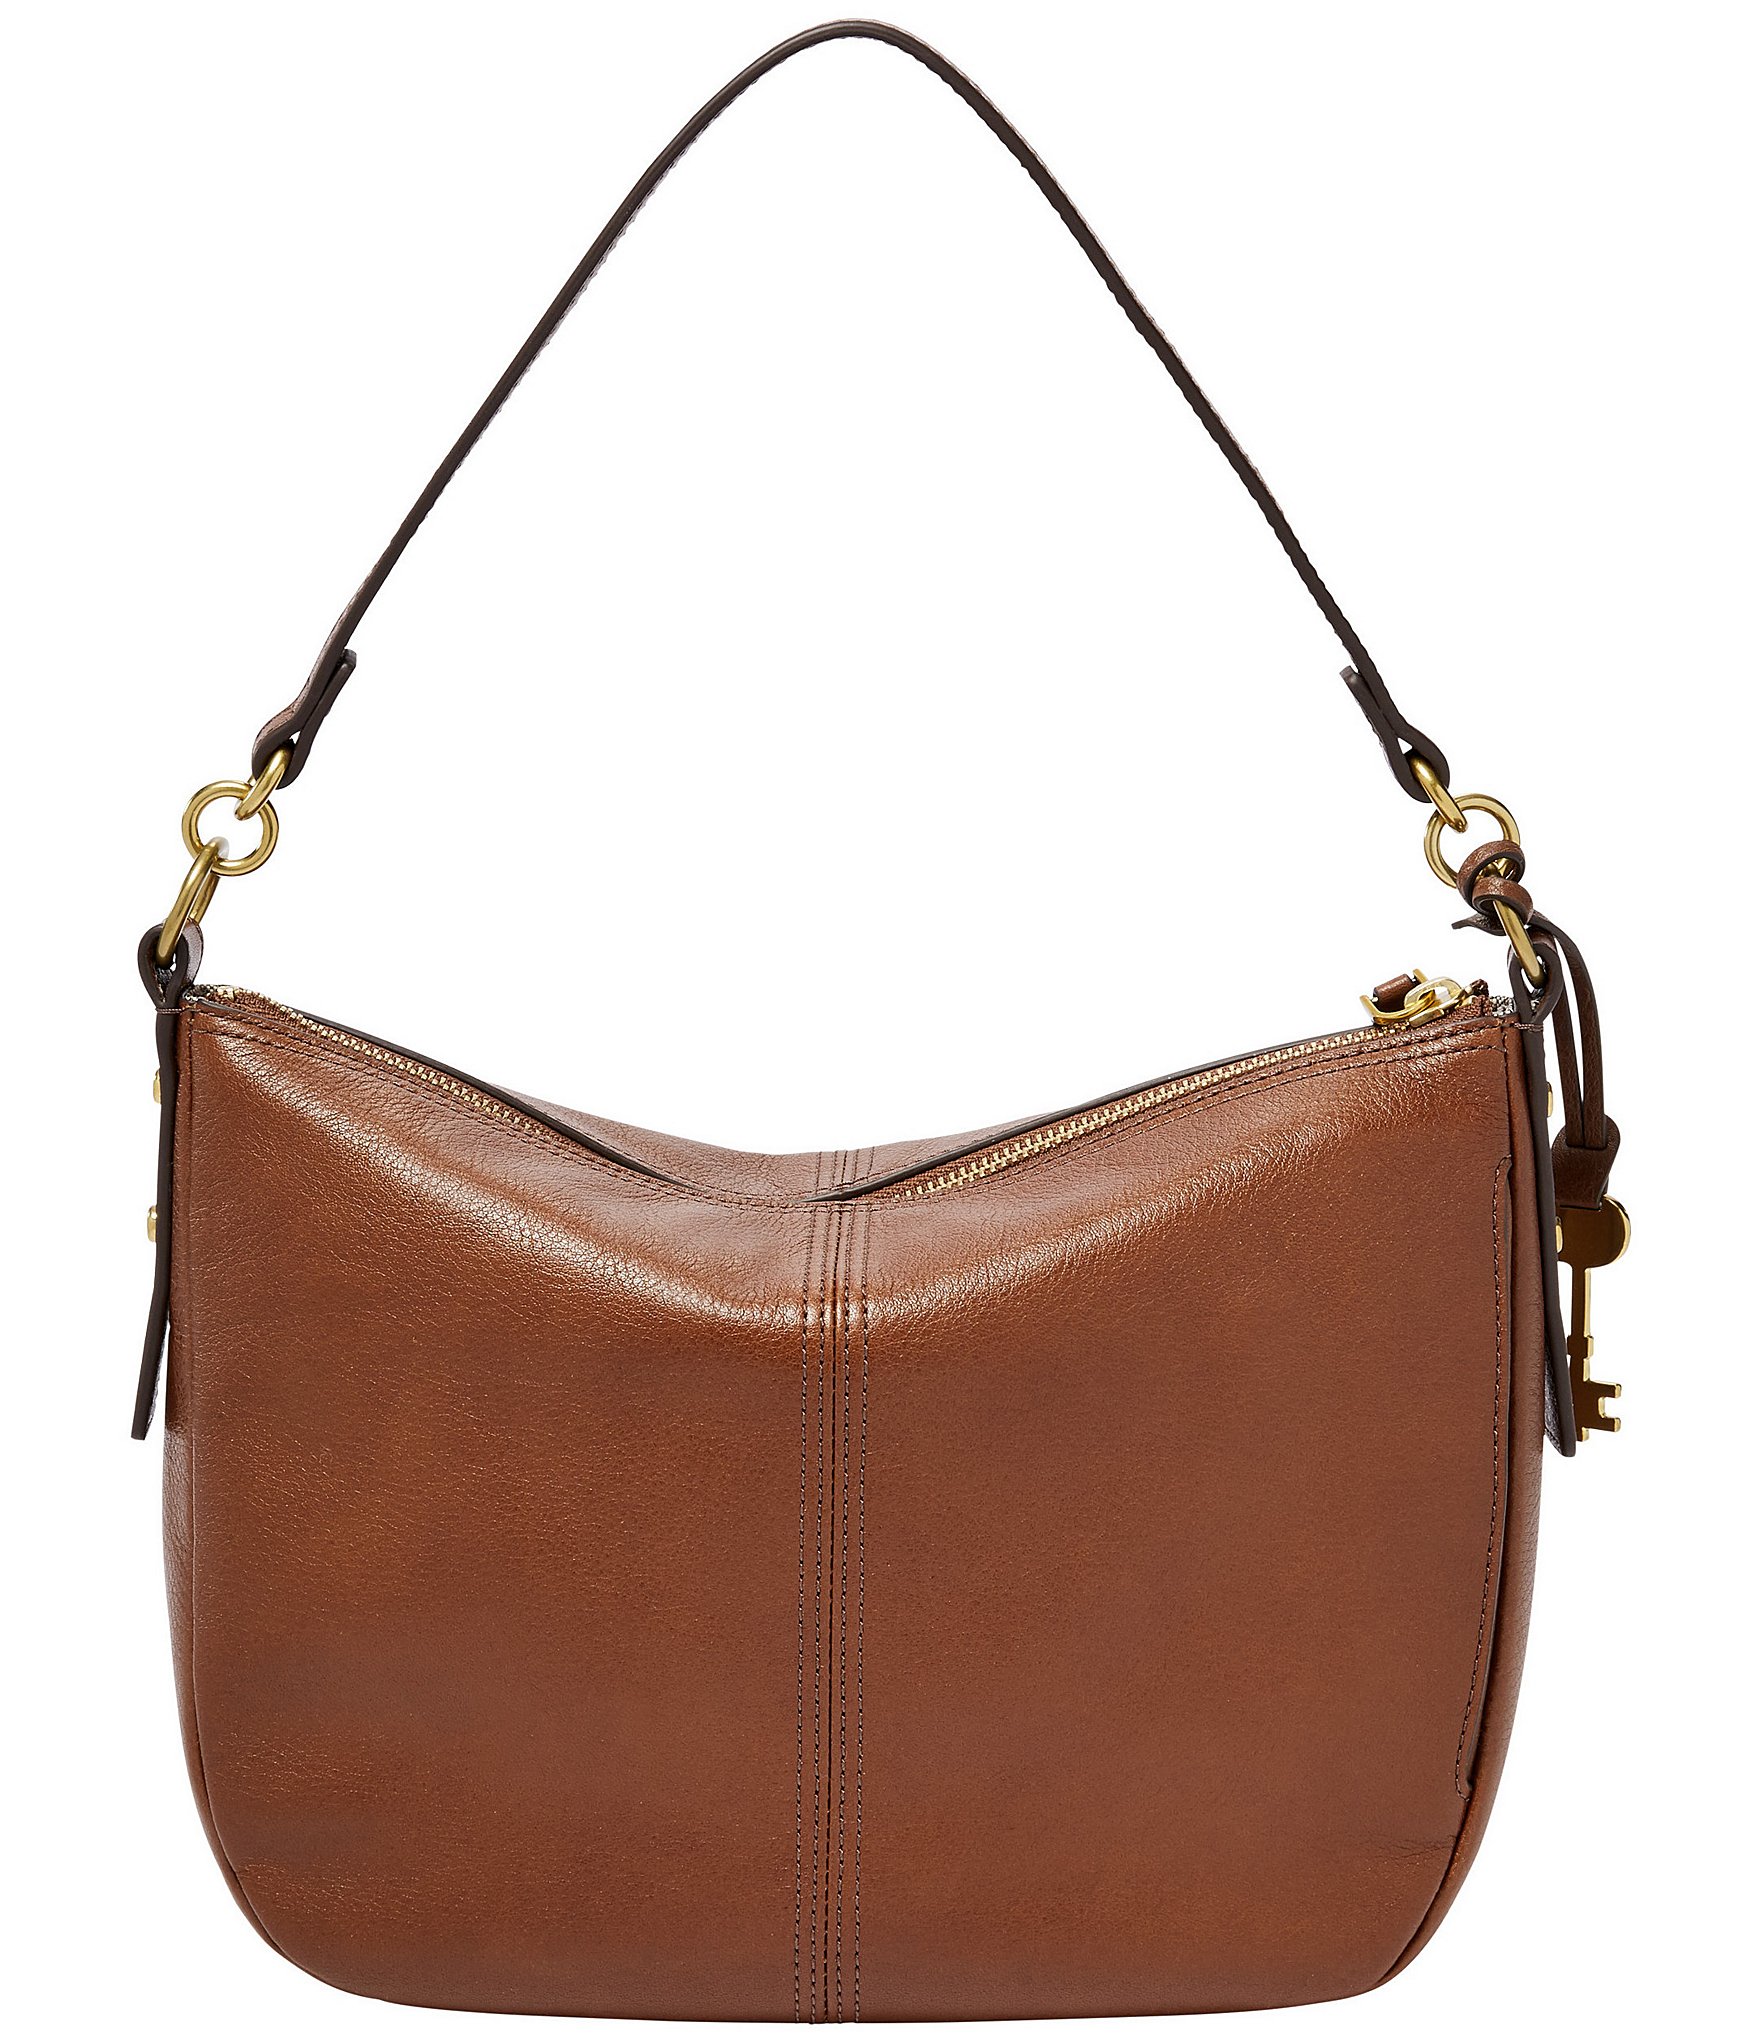 Fossil Jolie Small Leather Hobo Bag